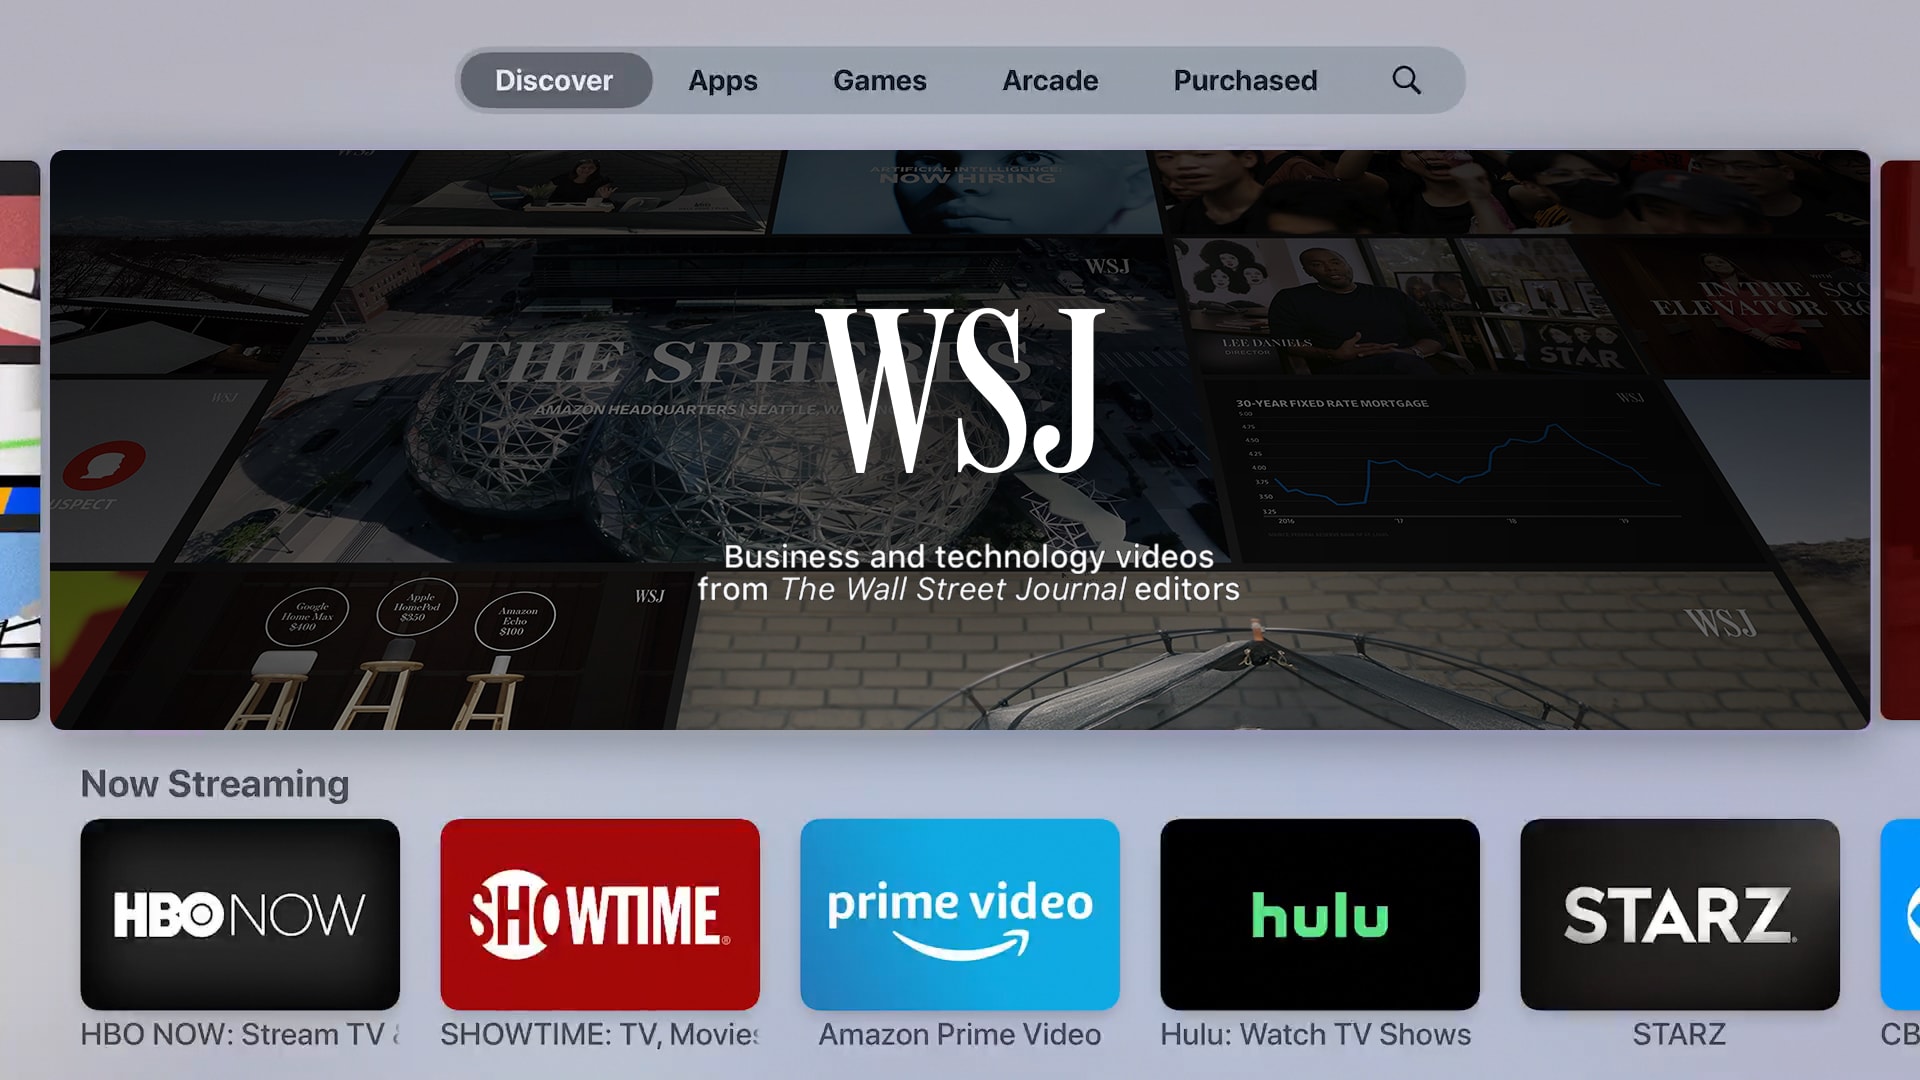 The WSJ app featured on the tvOS App Store with a large banner placement.